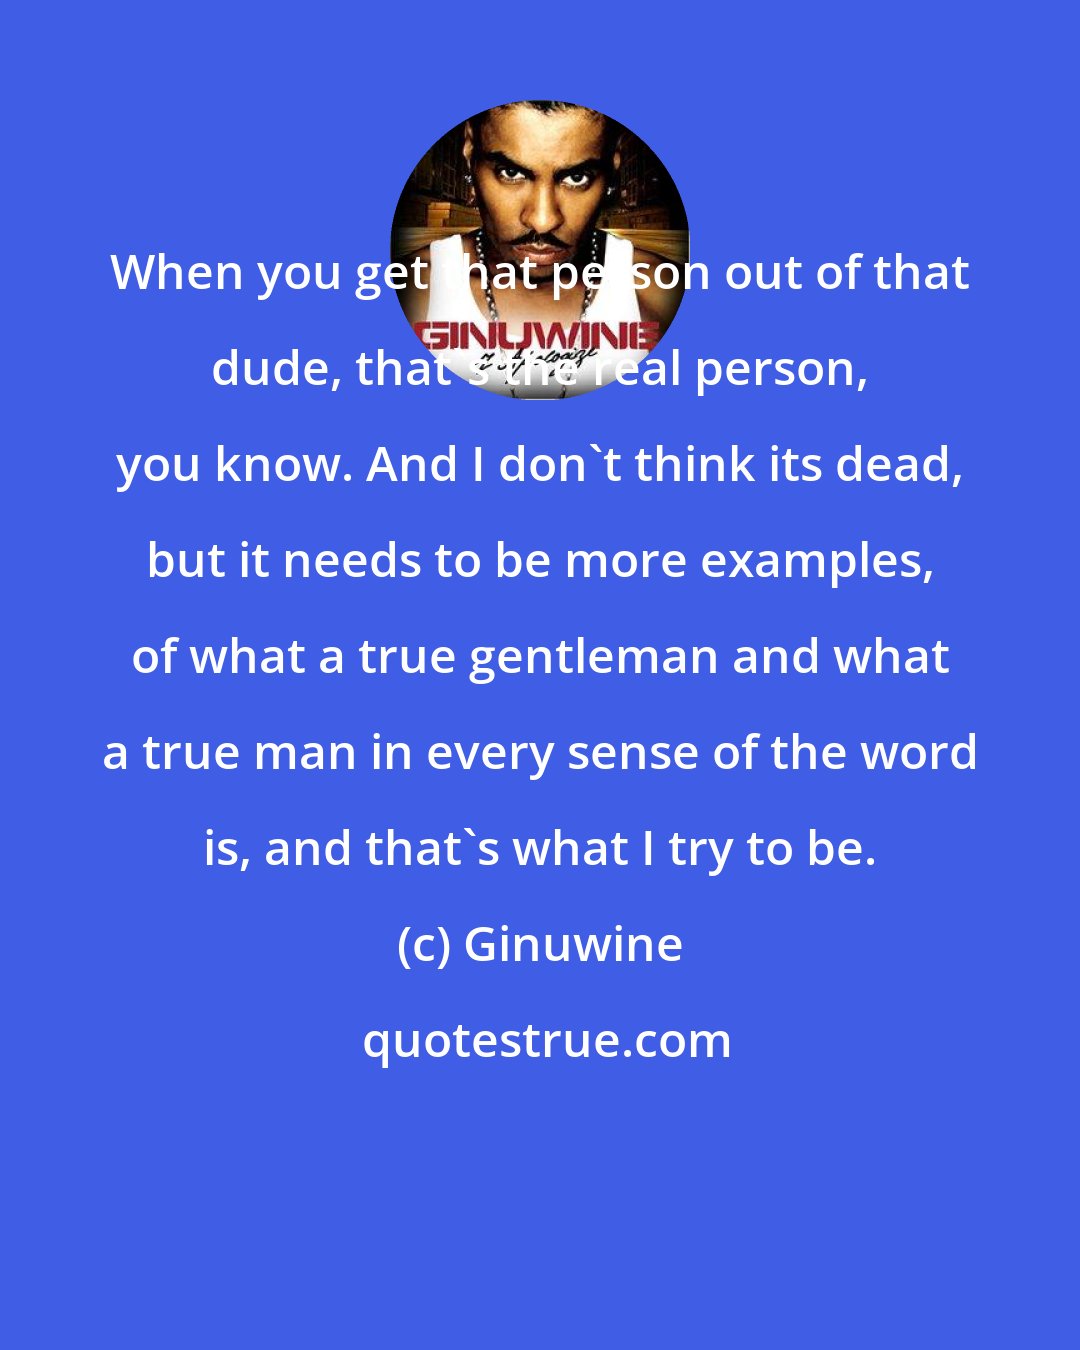 Ginuwine: When you get that person out of that dude, that's the real person, you know. And I don't think its dead, but it needs to be more examples, of what a true gentleman and what a true man in every sense of the word is, and that's what I try to be.